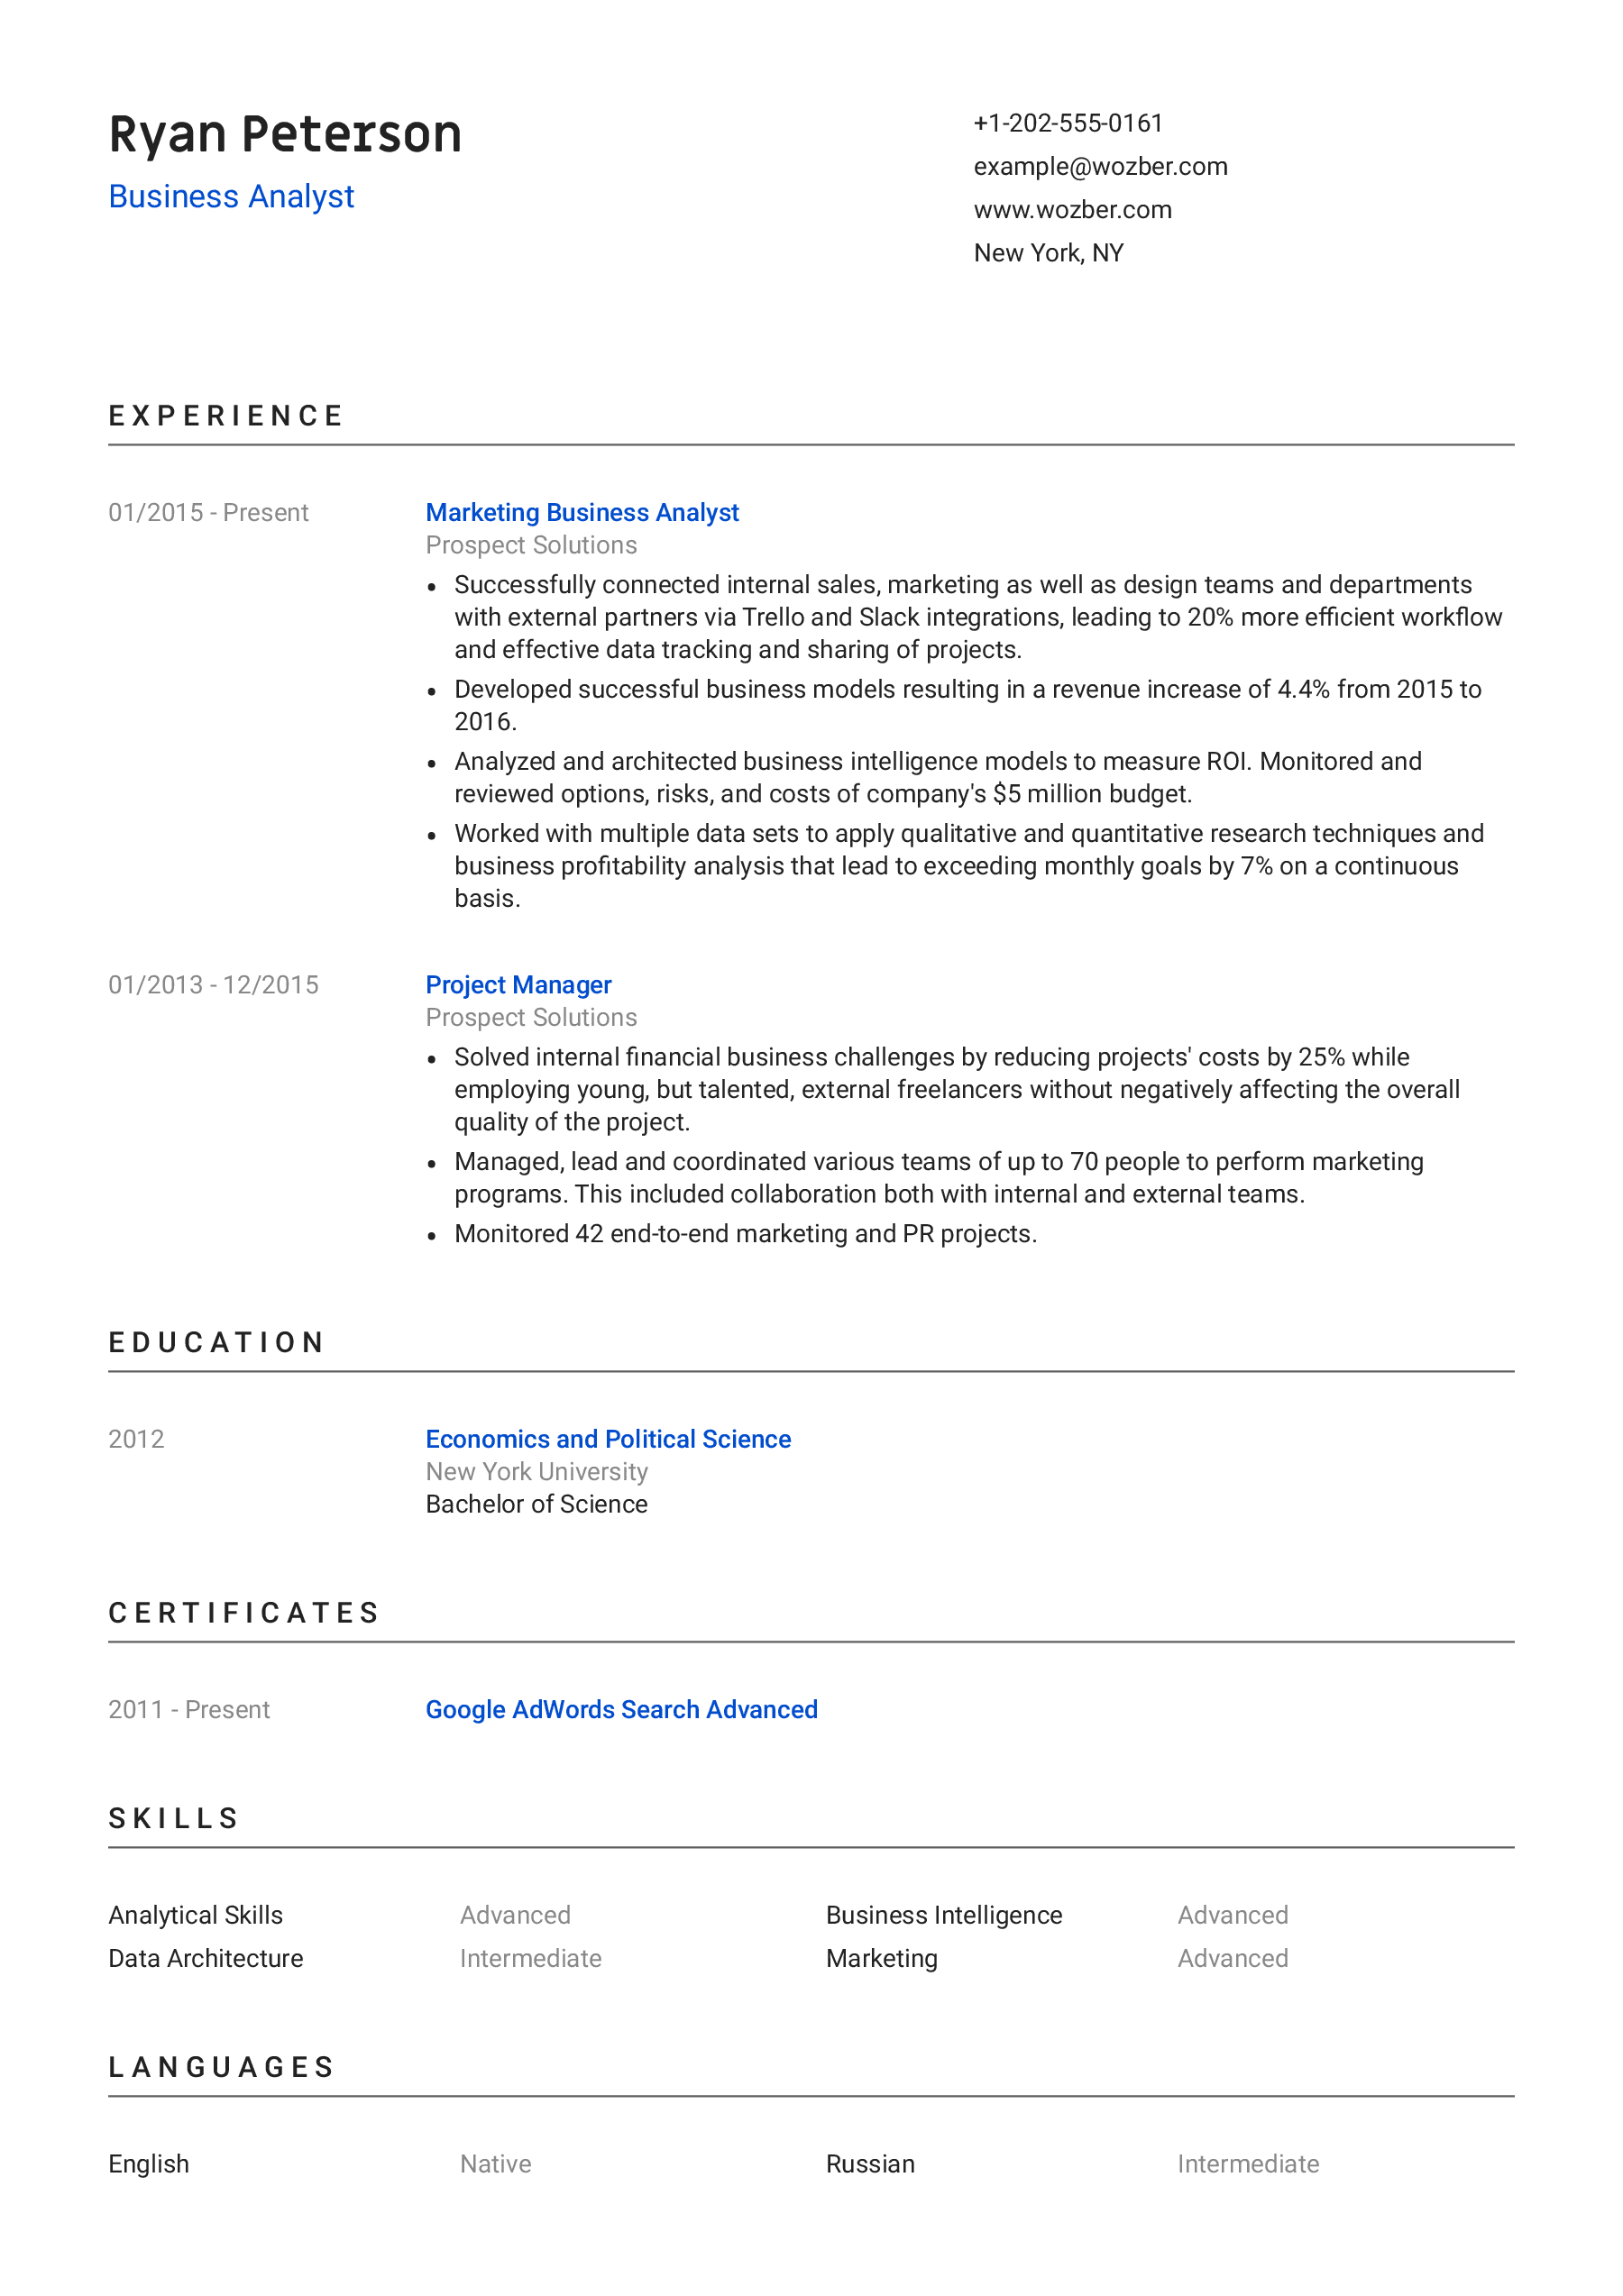 Modern resume example for Business Analyst position